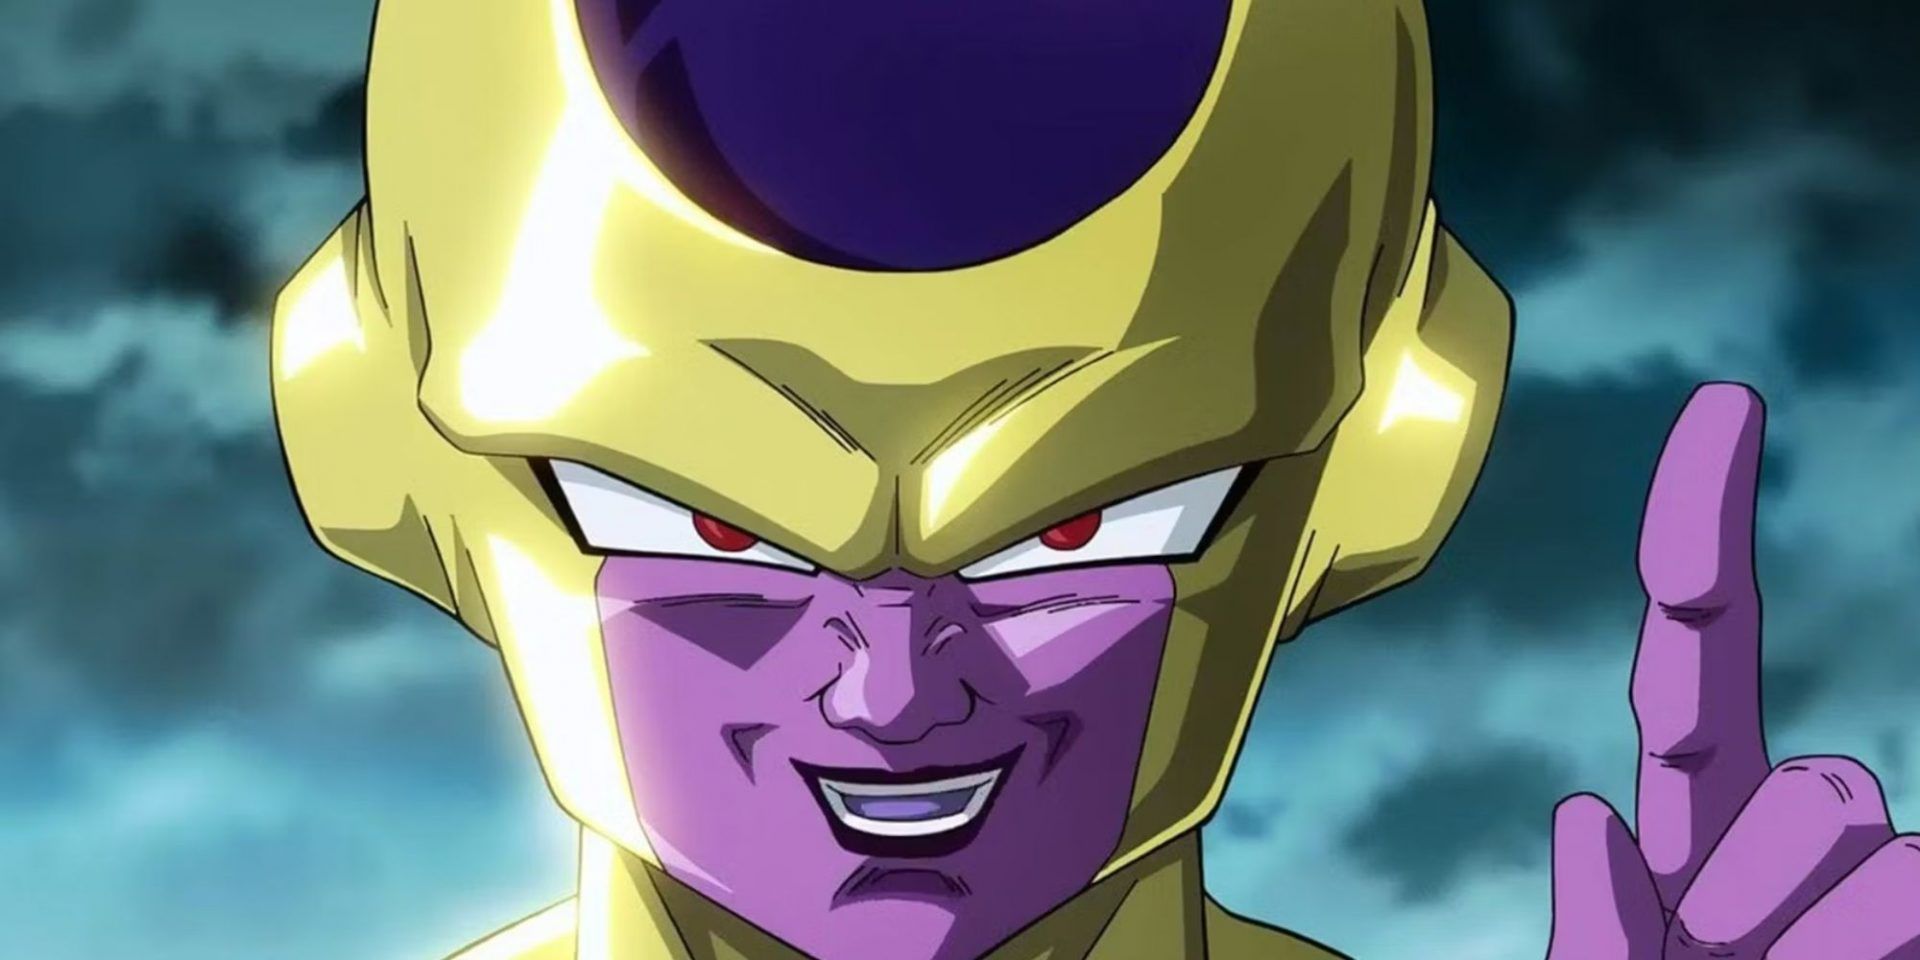 Dragon Ball Super Chapter 87 Spoilers - Frieza Reveals His New Black Form